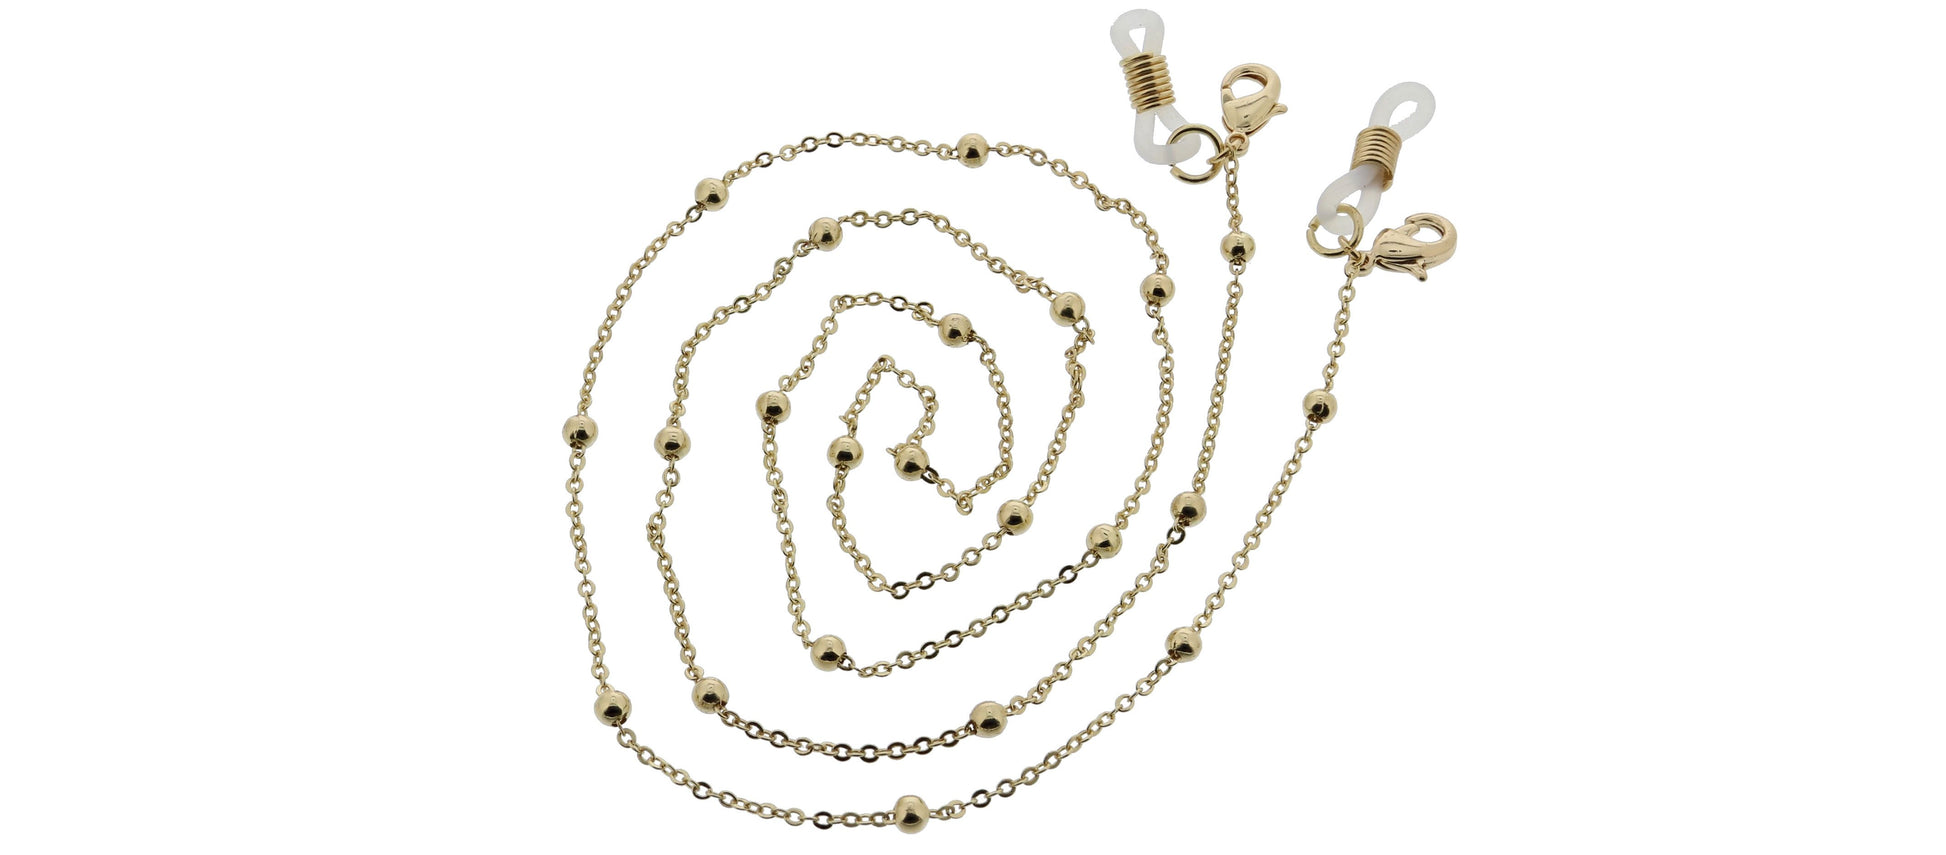 gold beaded glasses chain swirled on a white background